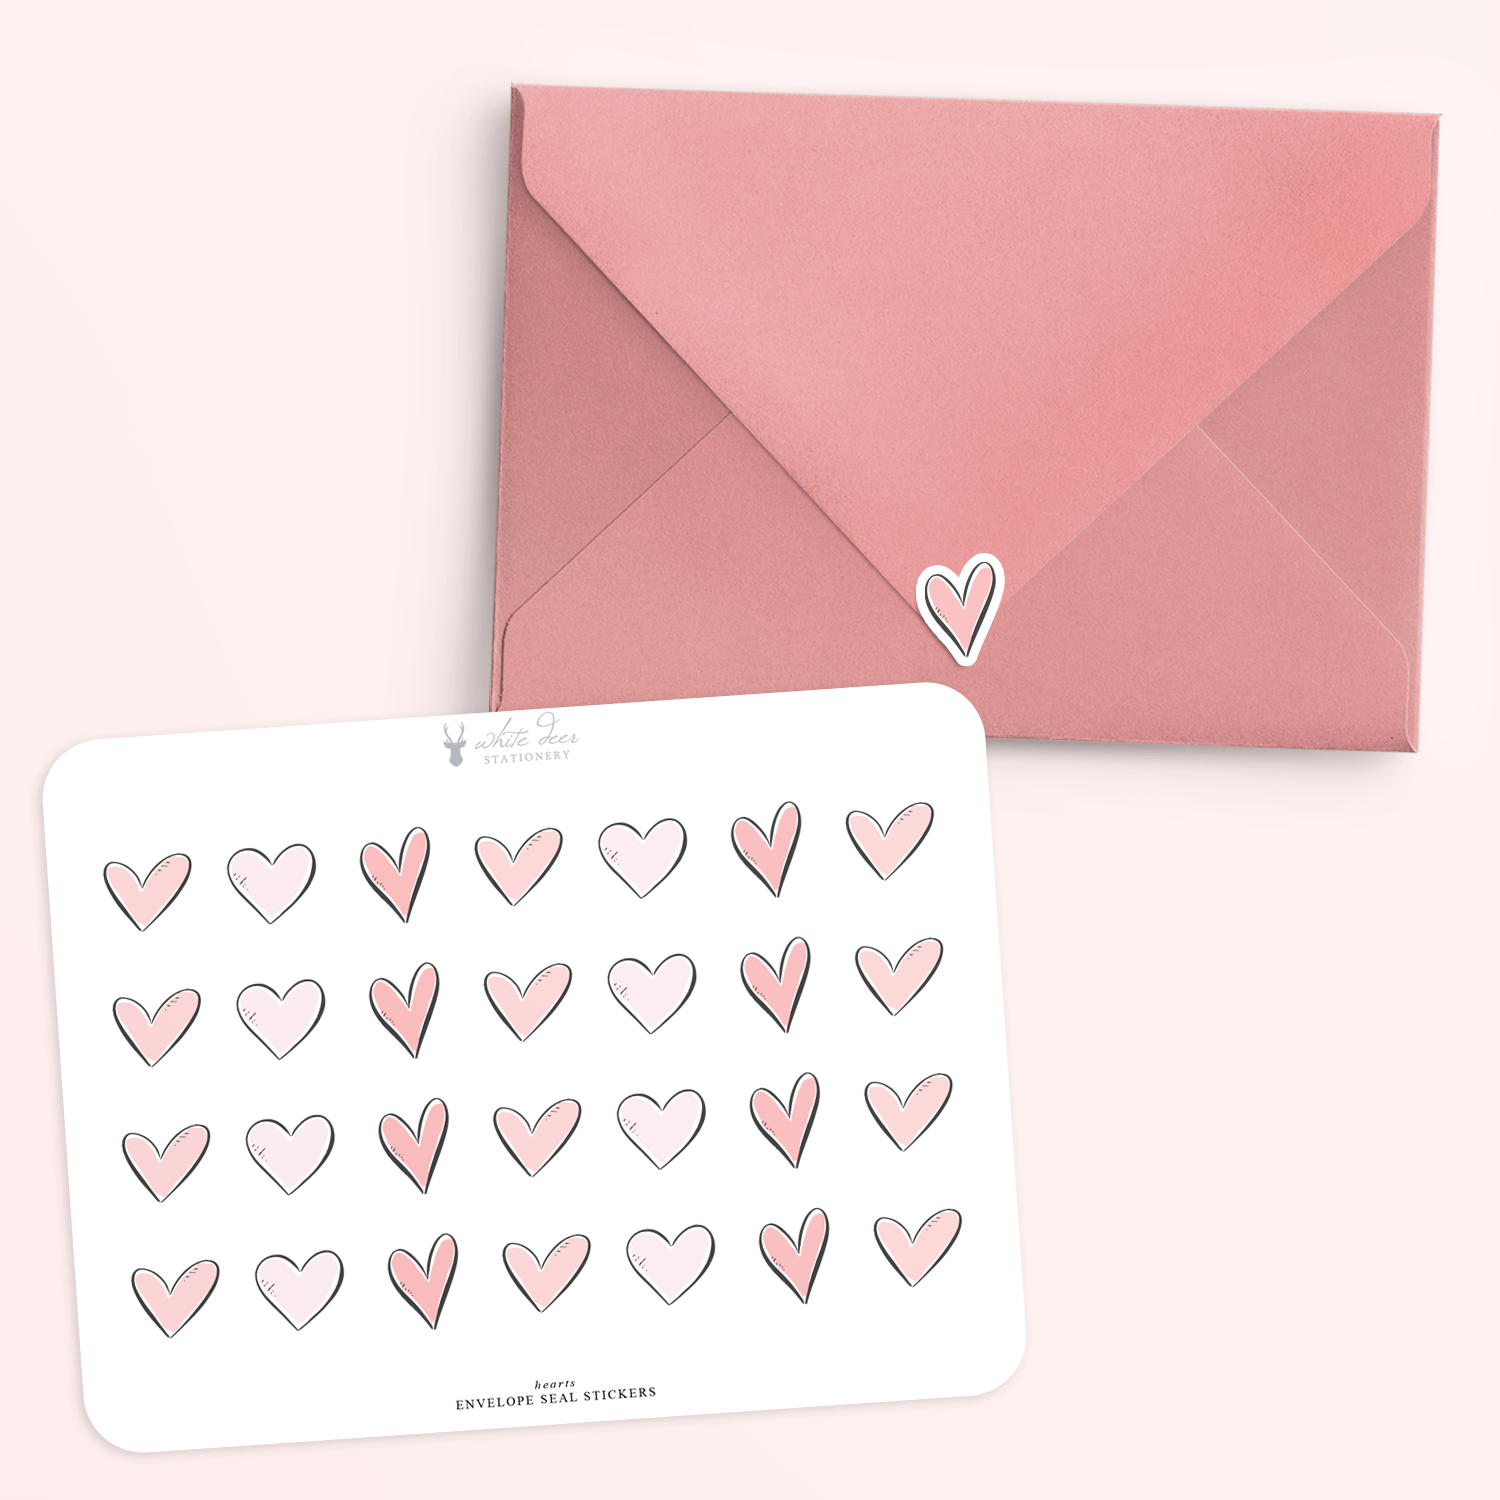 MAGICLULU 25 Sheets Envelope Seal Sticker Invitations Stickers Planner  Stickers Sealing Heart Stickers Envelope Stickers Gift Envelopes Heart  Shape